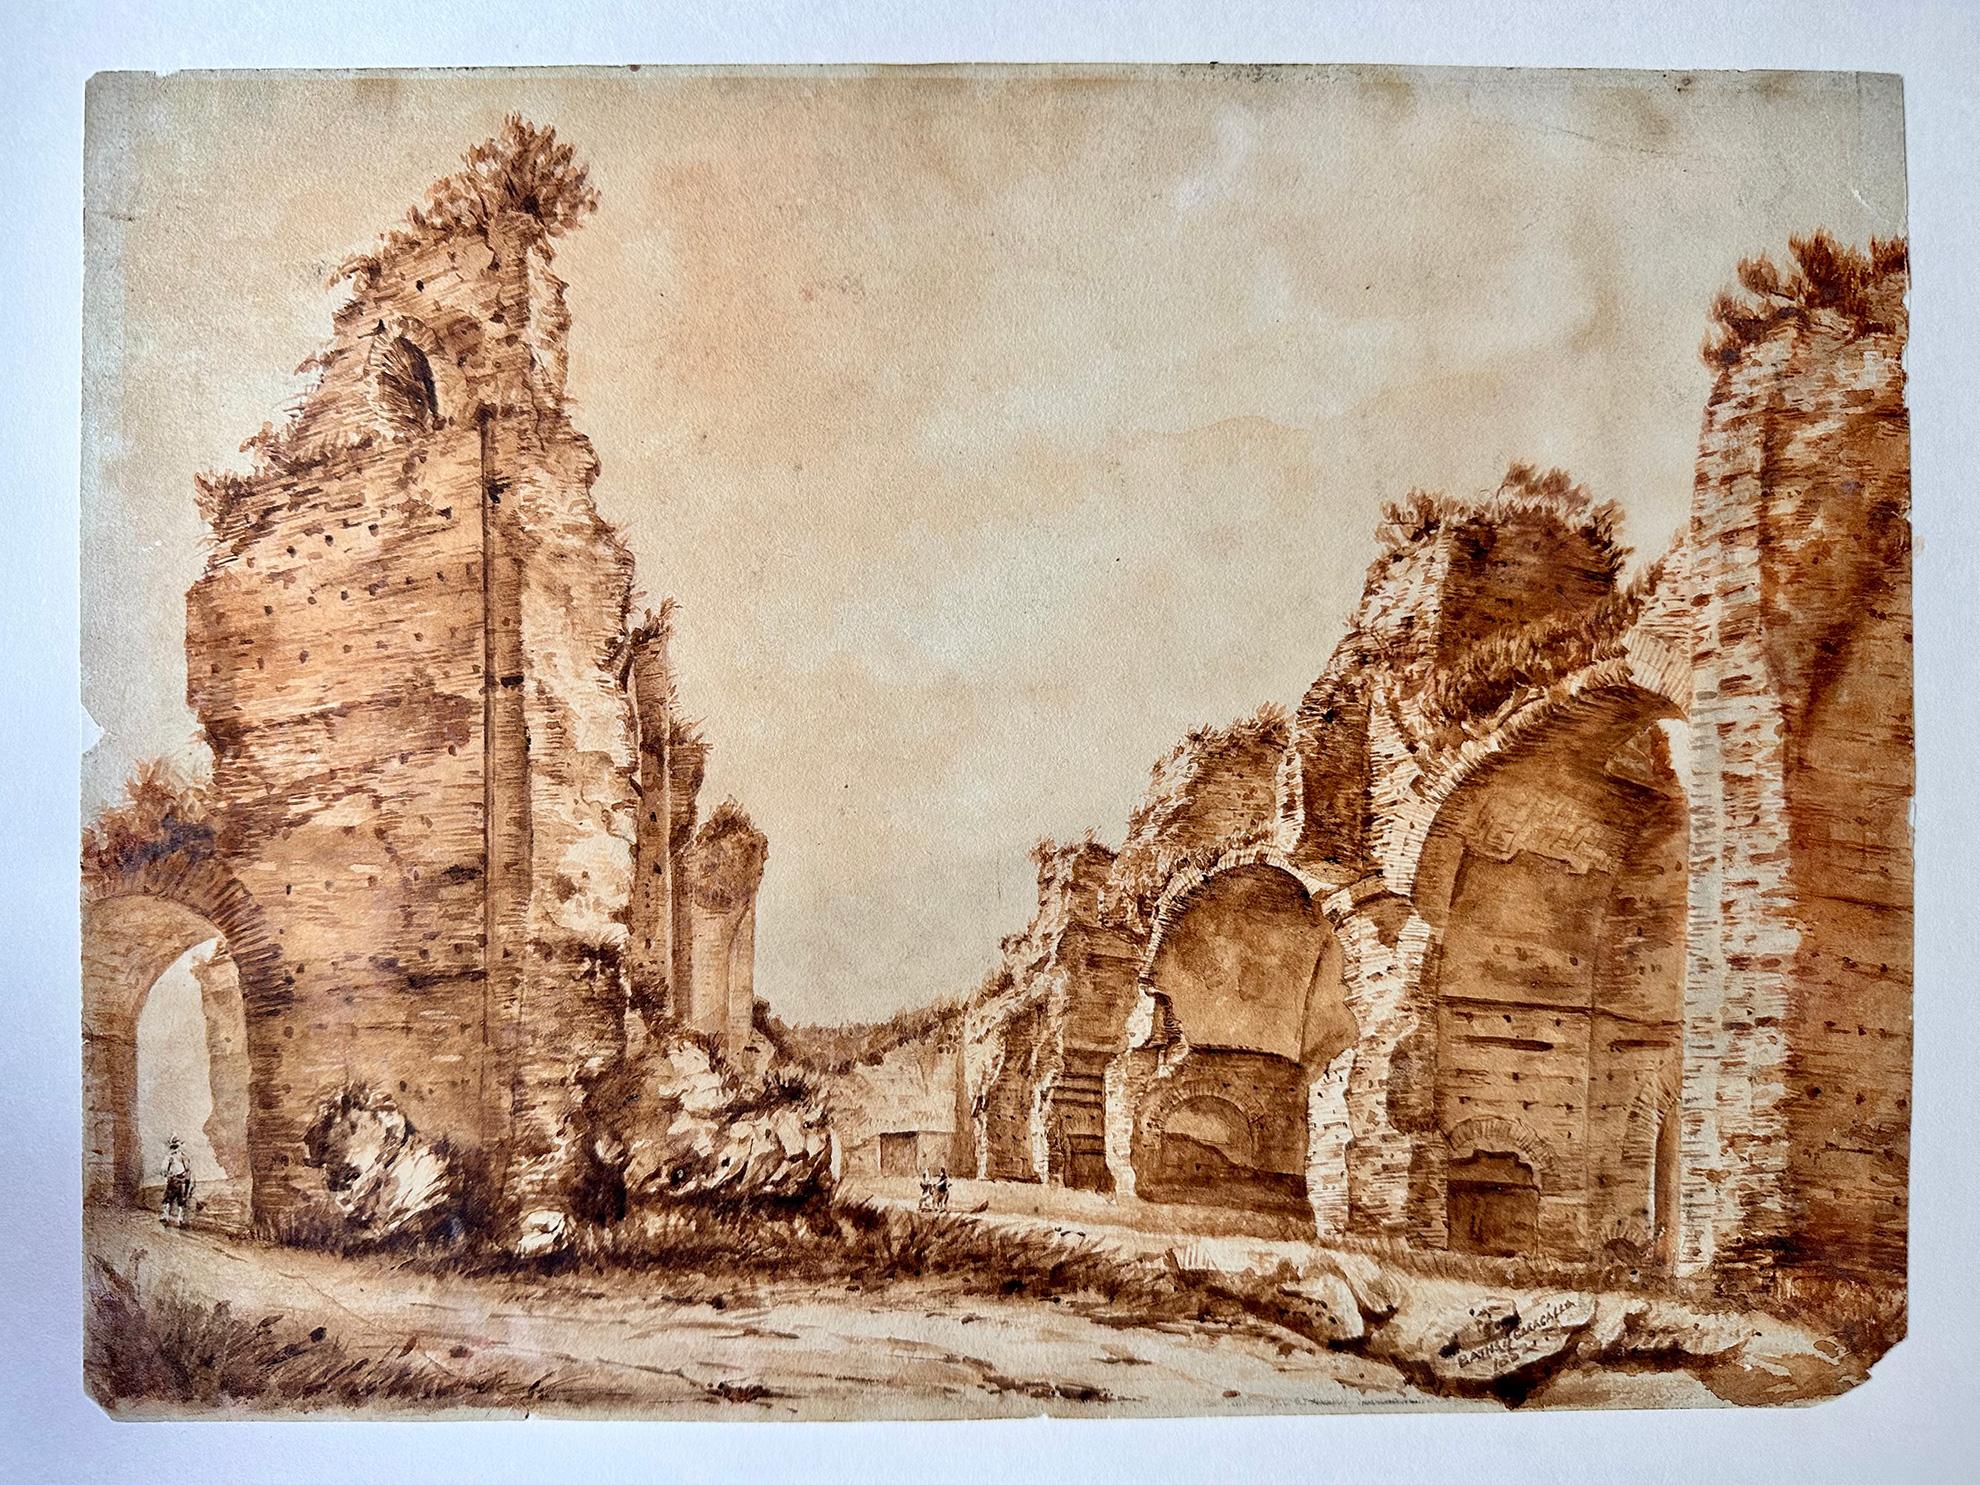 Baths of Caracalla, Rome - Art by Unknown